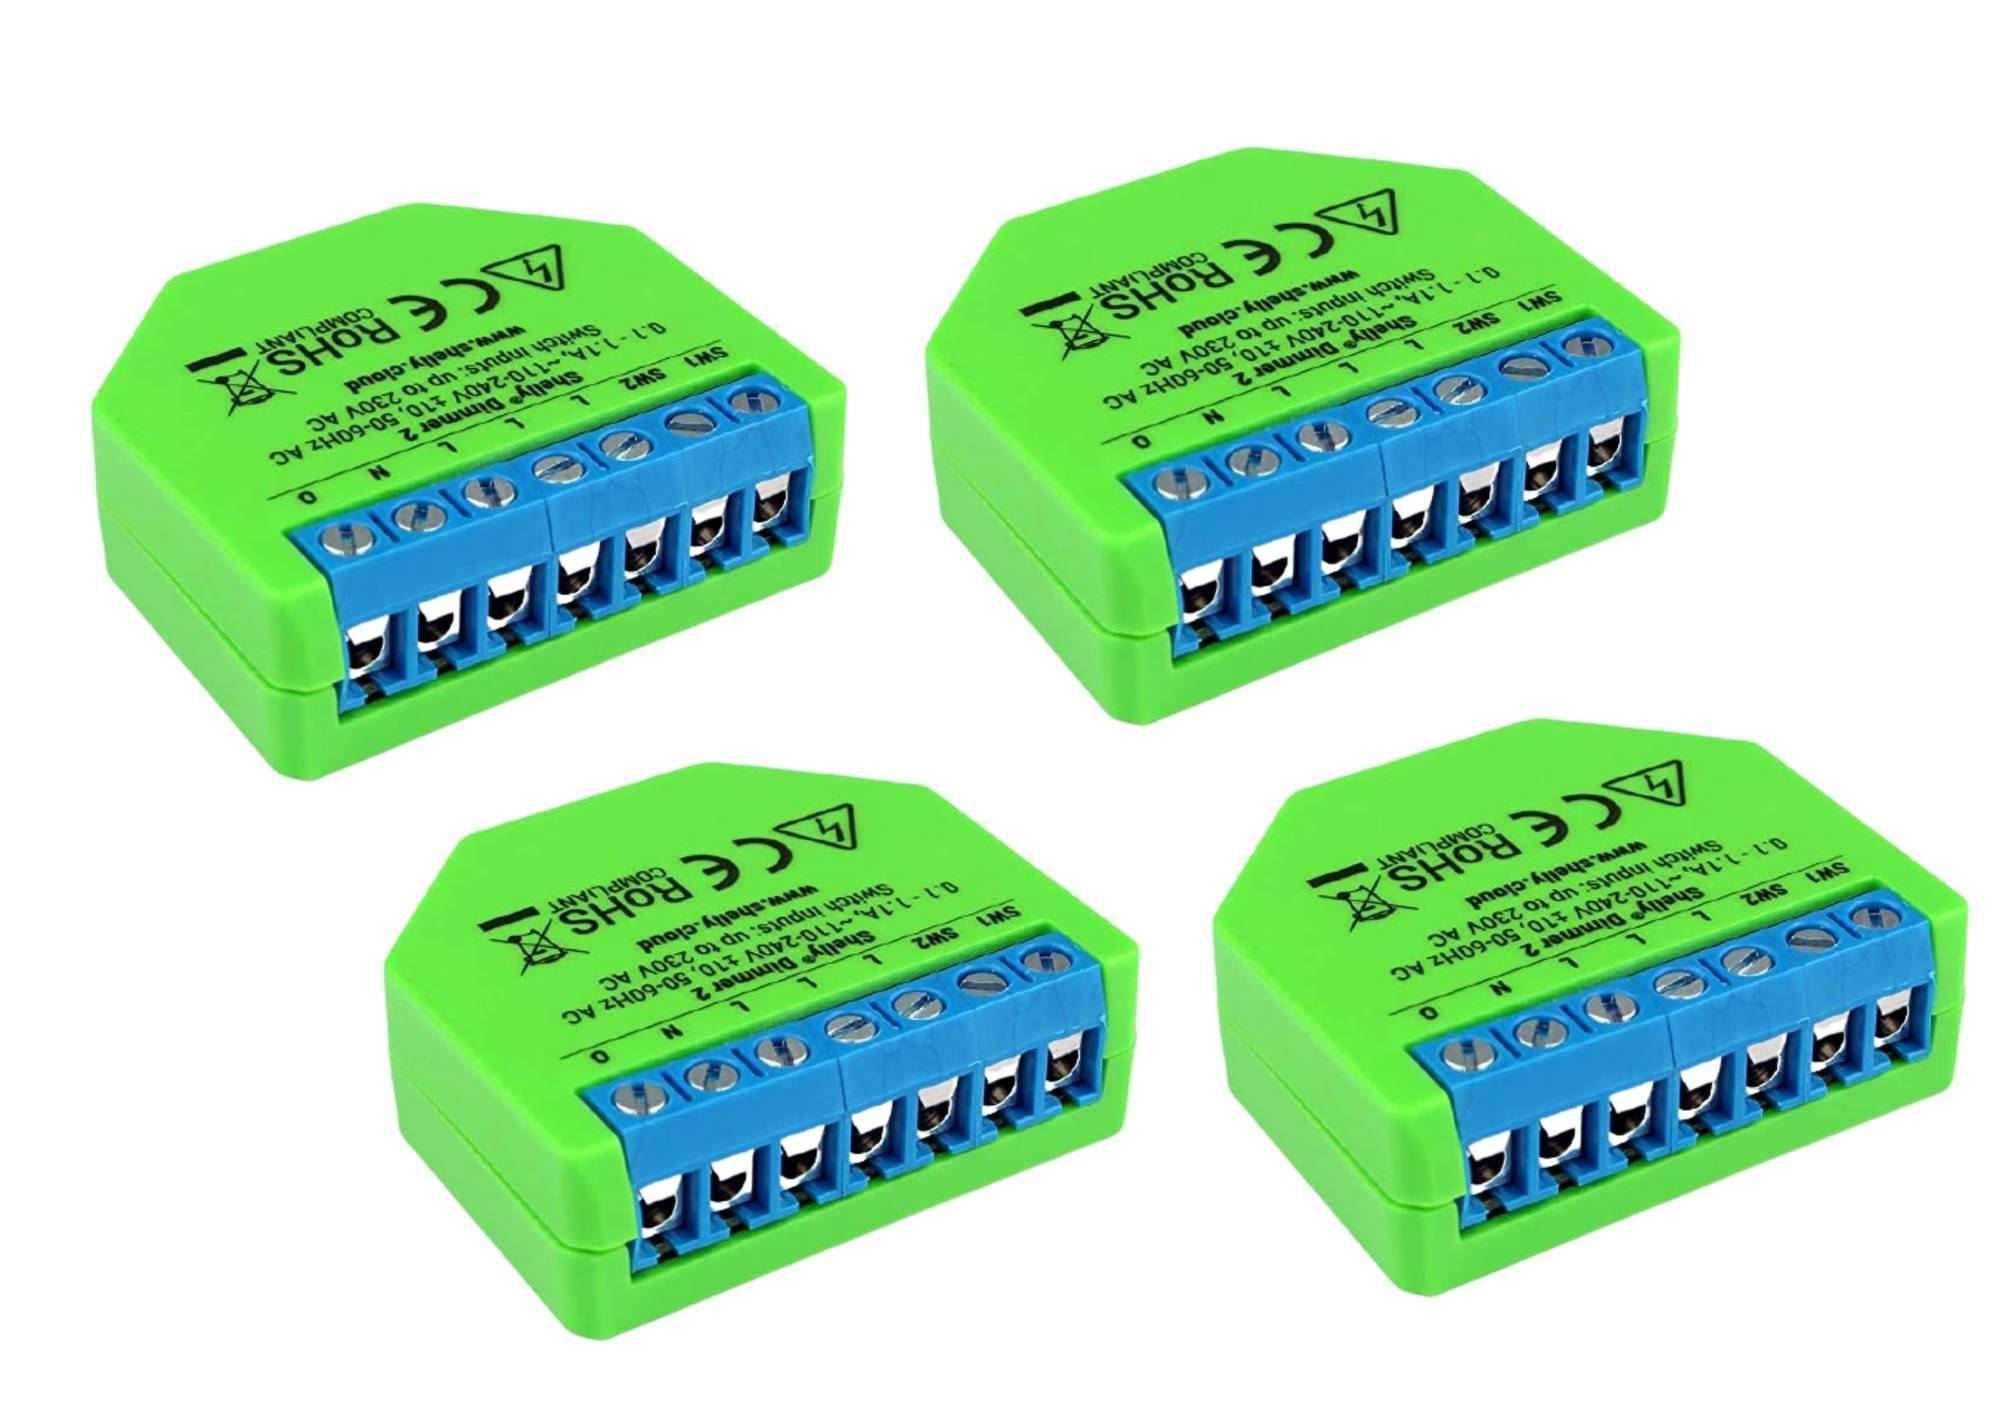 Shelly Wi-Fi Dimmer Module - 4 Pack